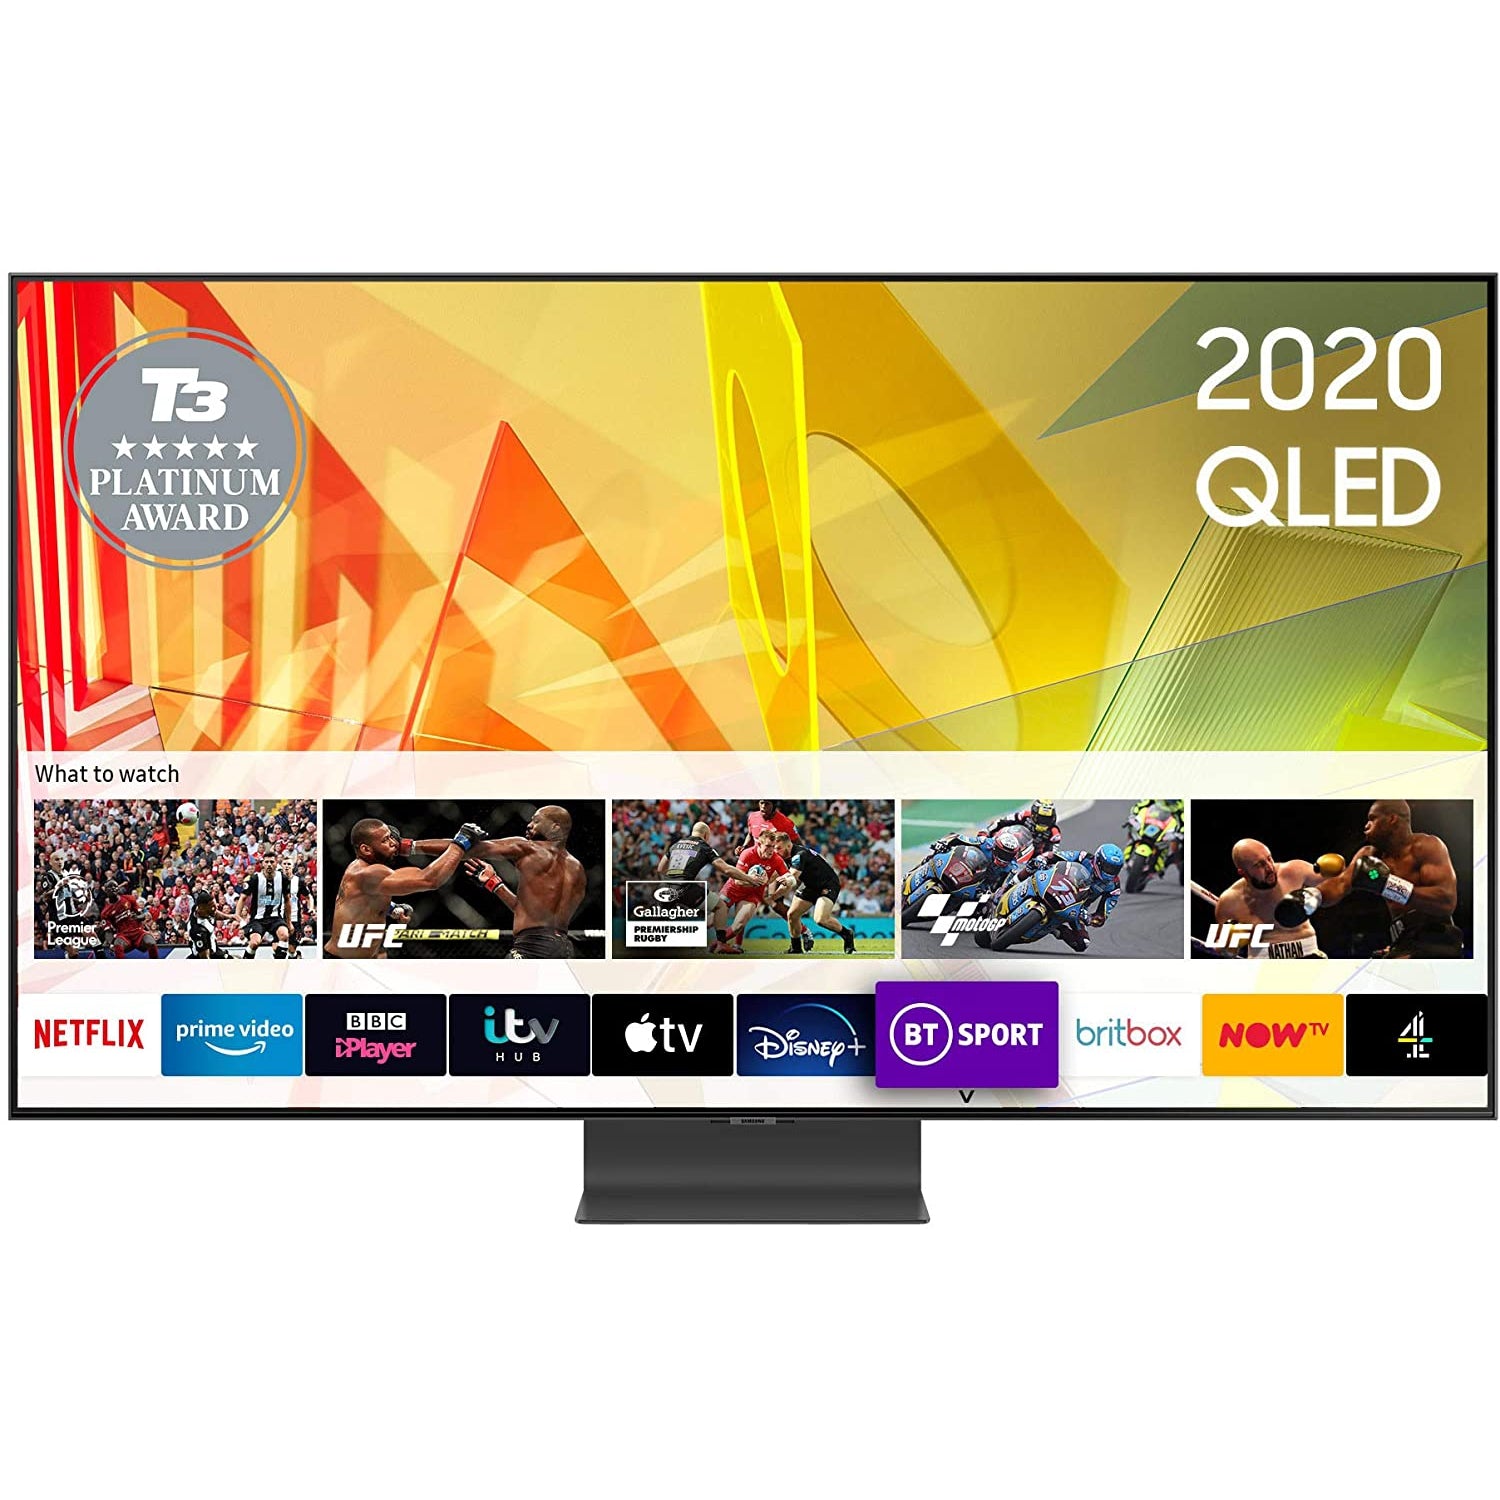 Samsung (2020) 65" Q95T Flagship QLED 4K HDR 2000 Smart TV with Tizen OS - Carbon Silver